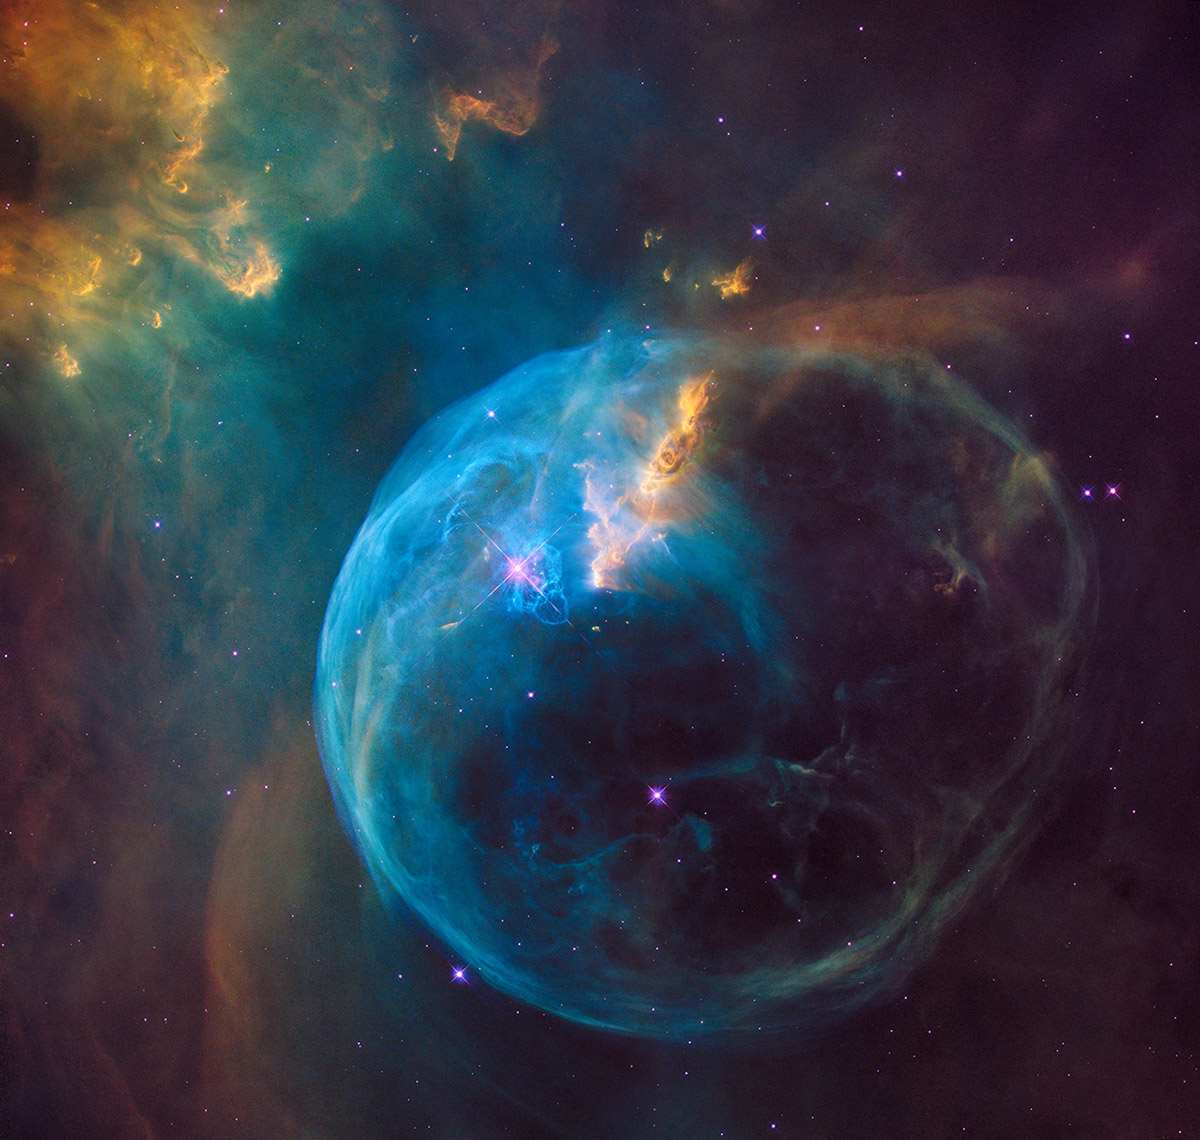 The Bubble Nebula, also known as NGC 7635, is an emission nebula located 8000 light-years away, image released on April 21, 2016.